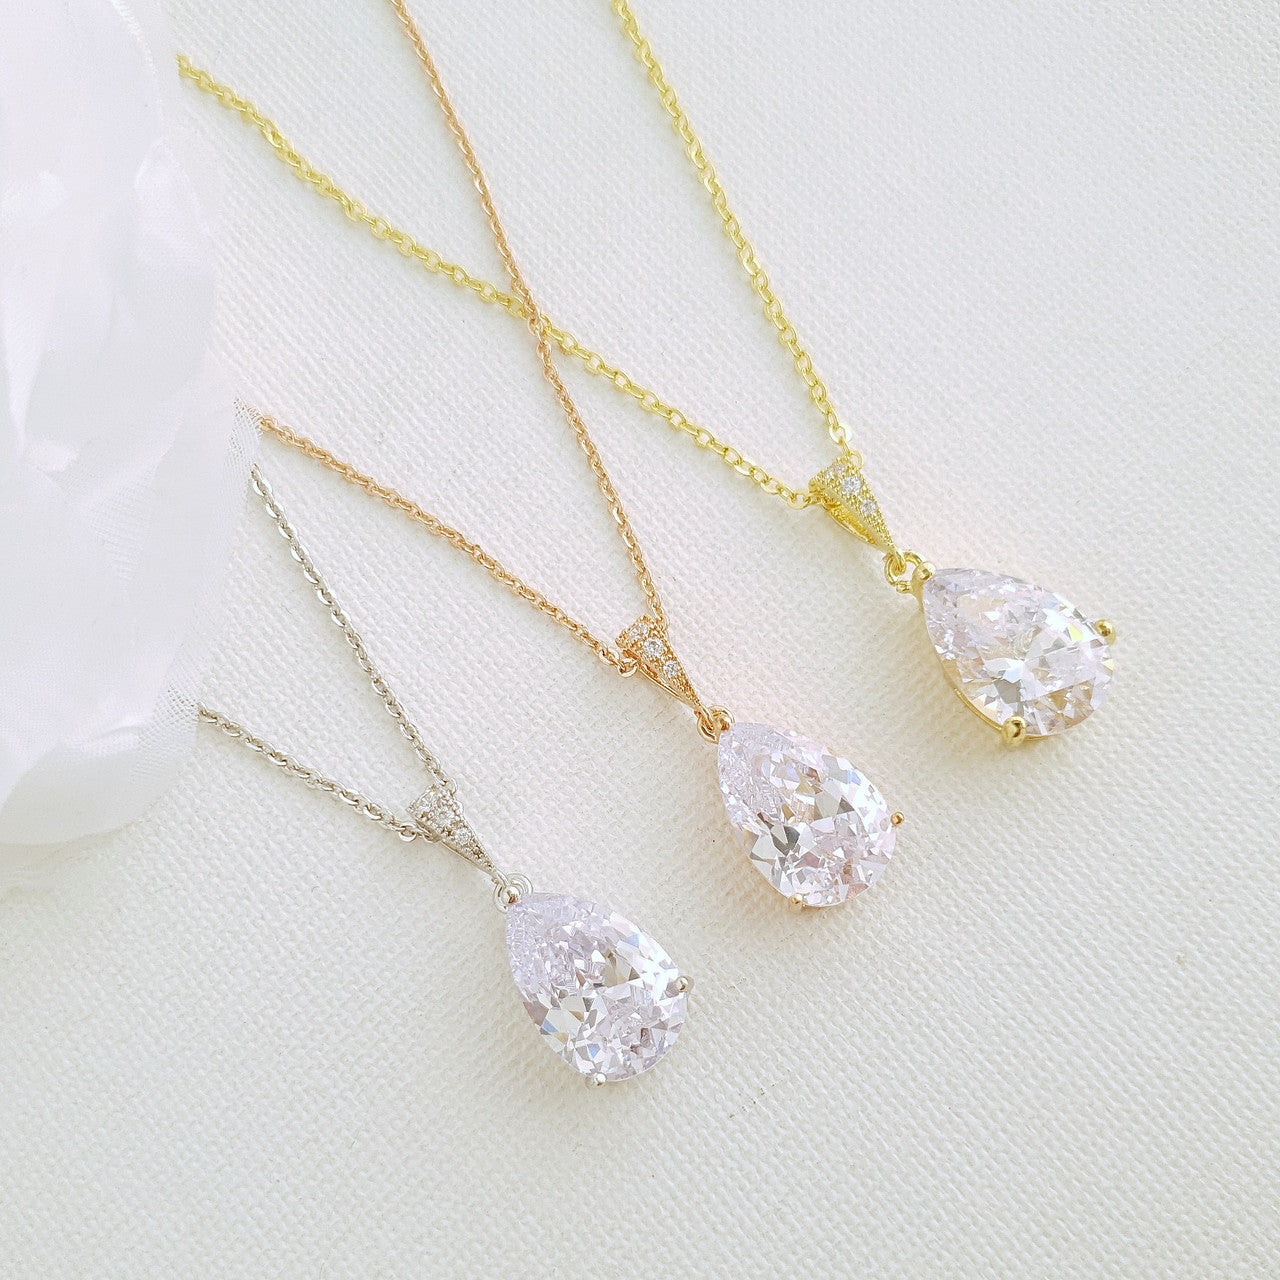 Clear Cubic Zirconia Earrings and Necklace Set in Rose Gold-Clara